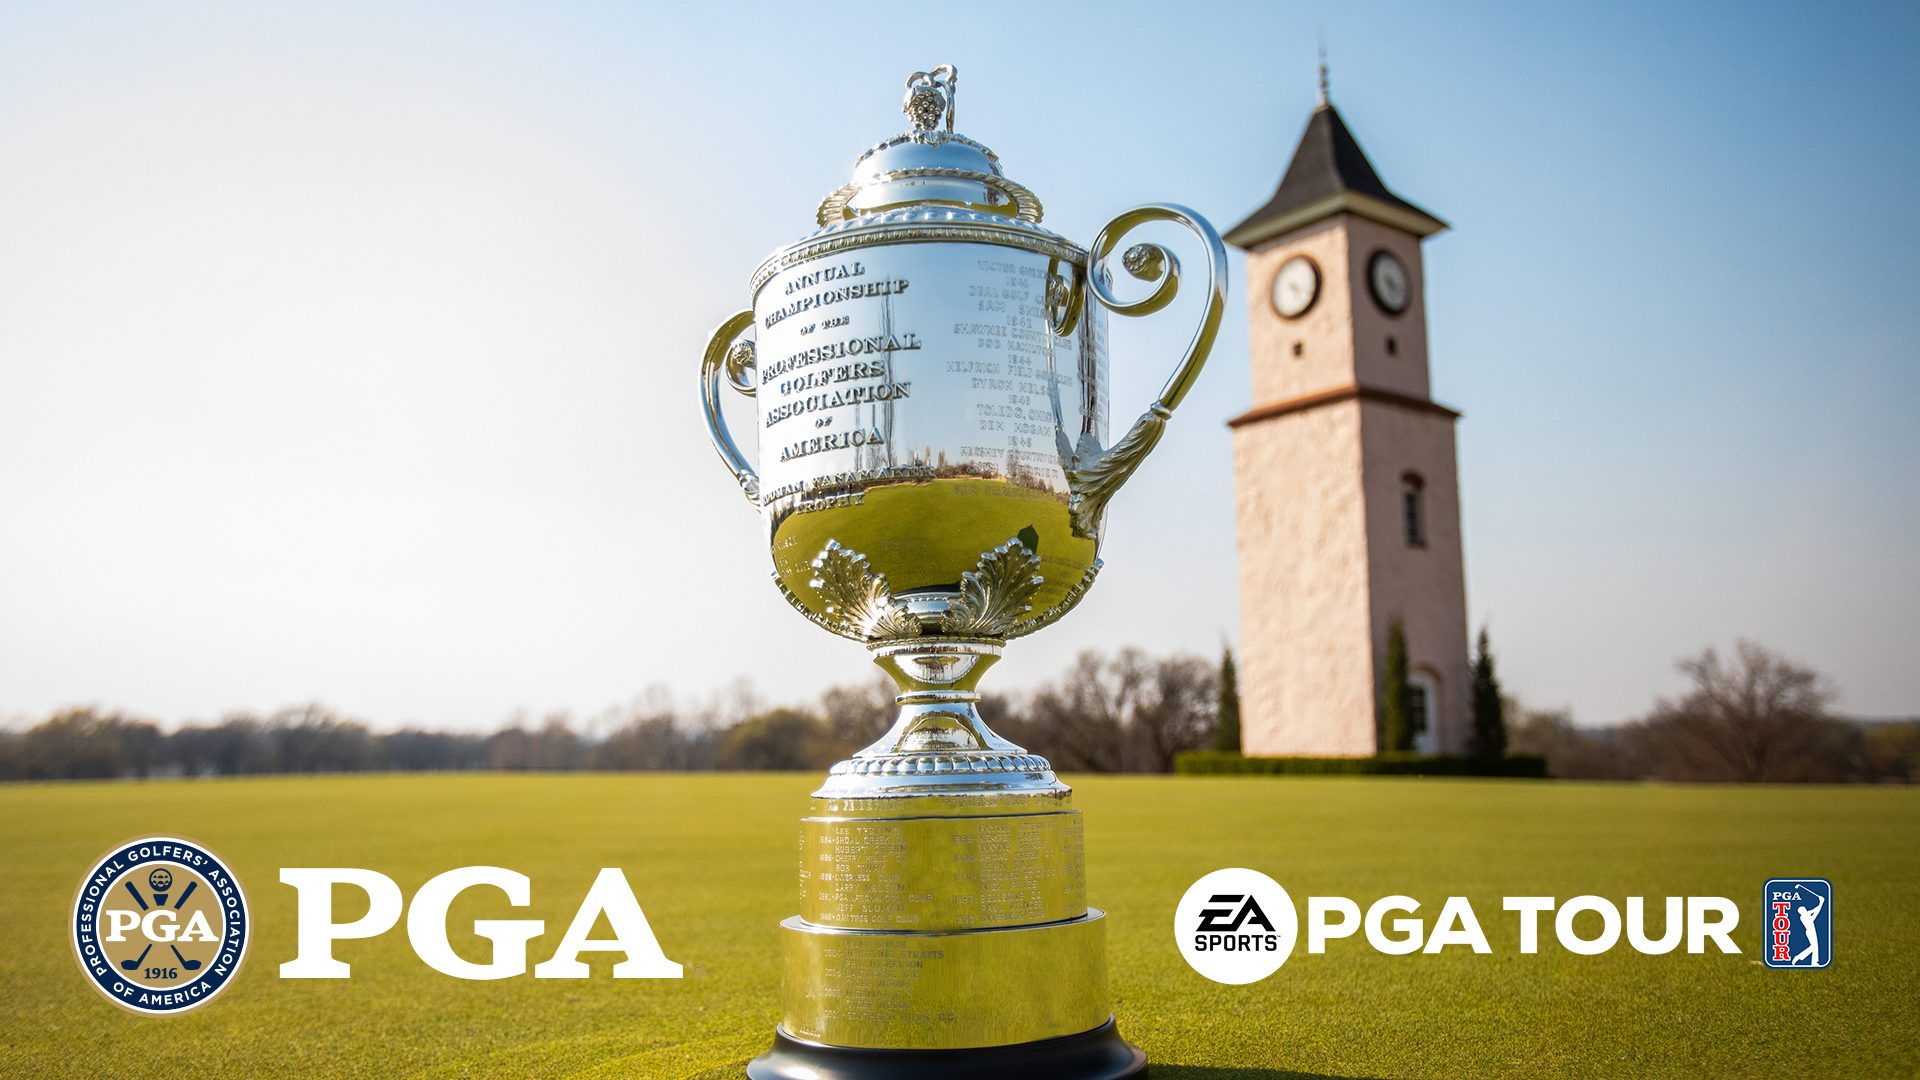 ELECTRONIC ARTS AND THE PGA OF AMERICA PARTNER TO BRING PGA CHAMPIONSHIP AND PGA COACHES